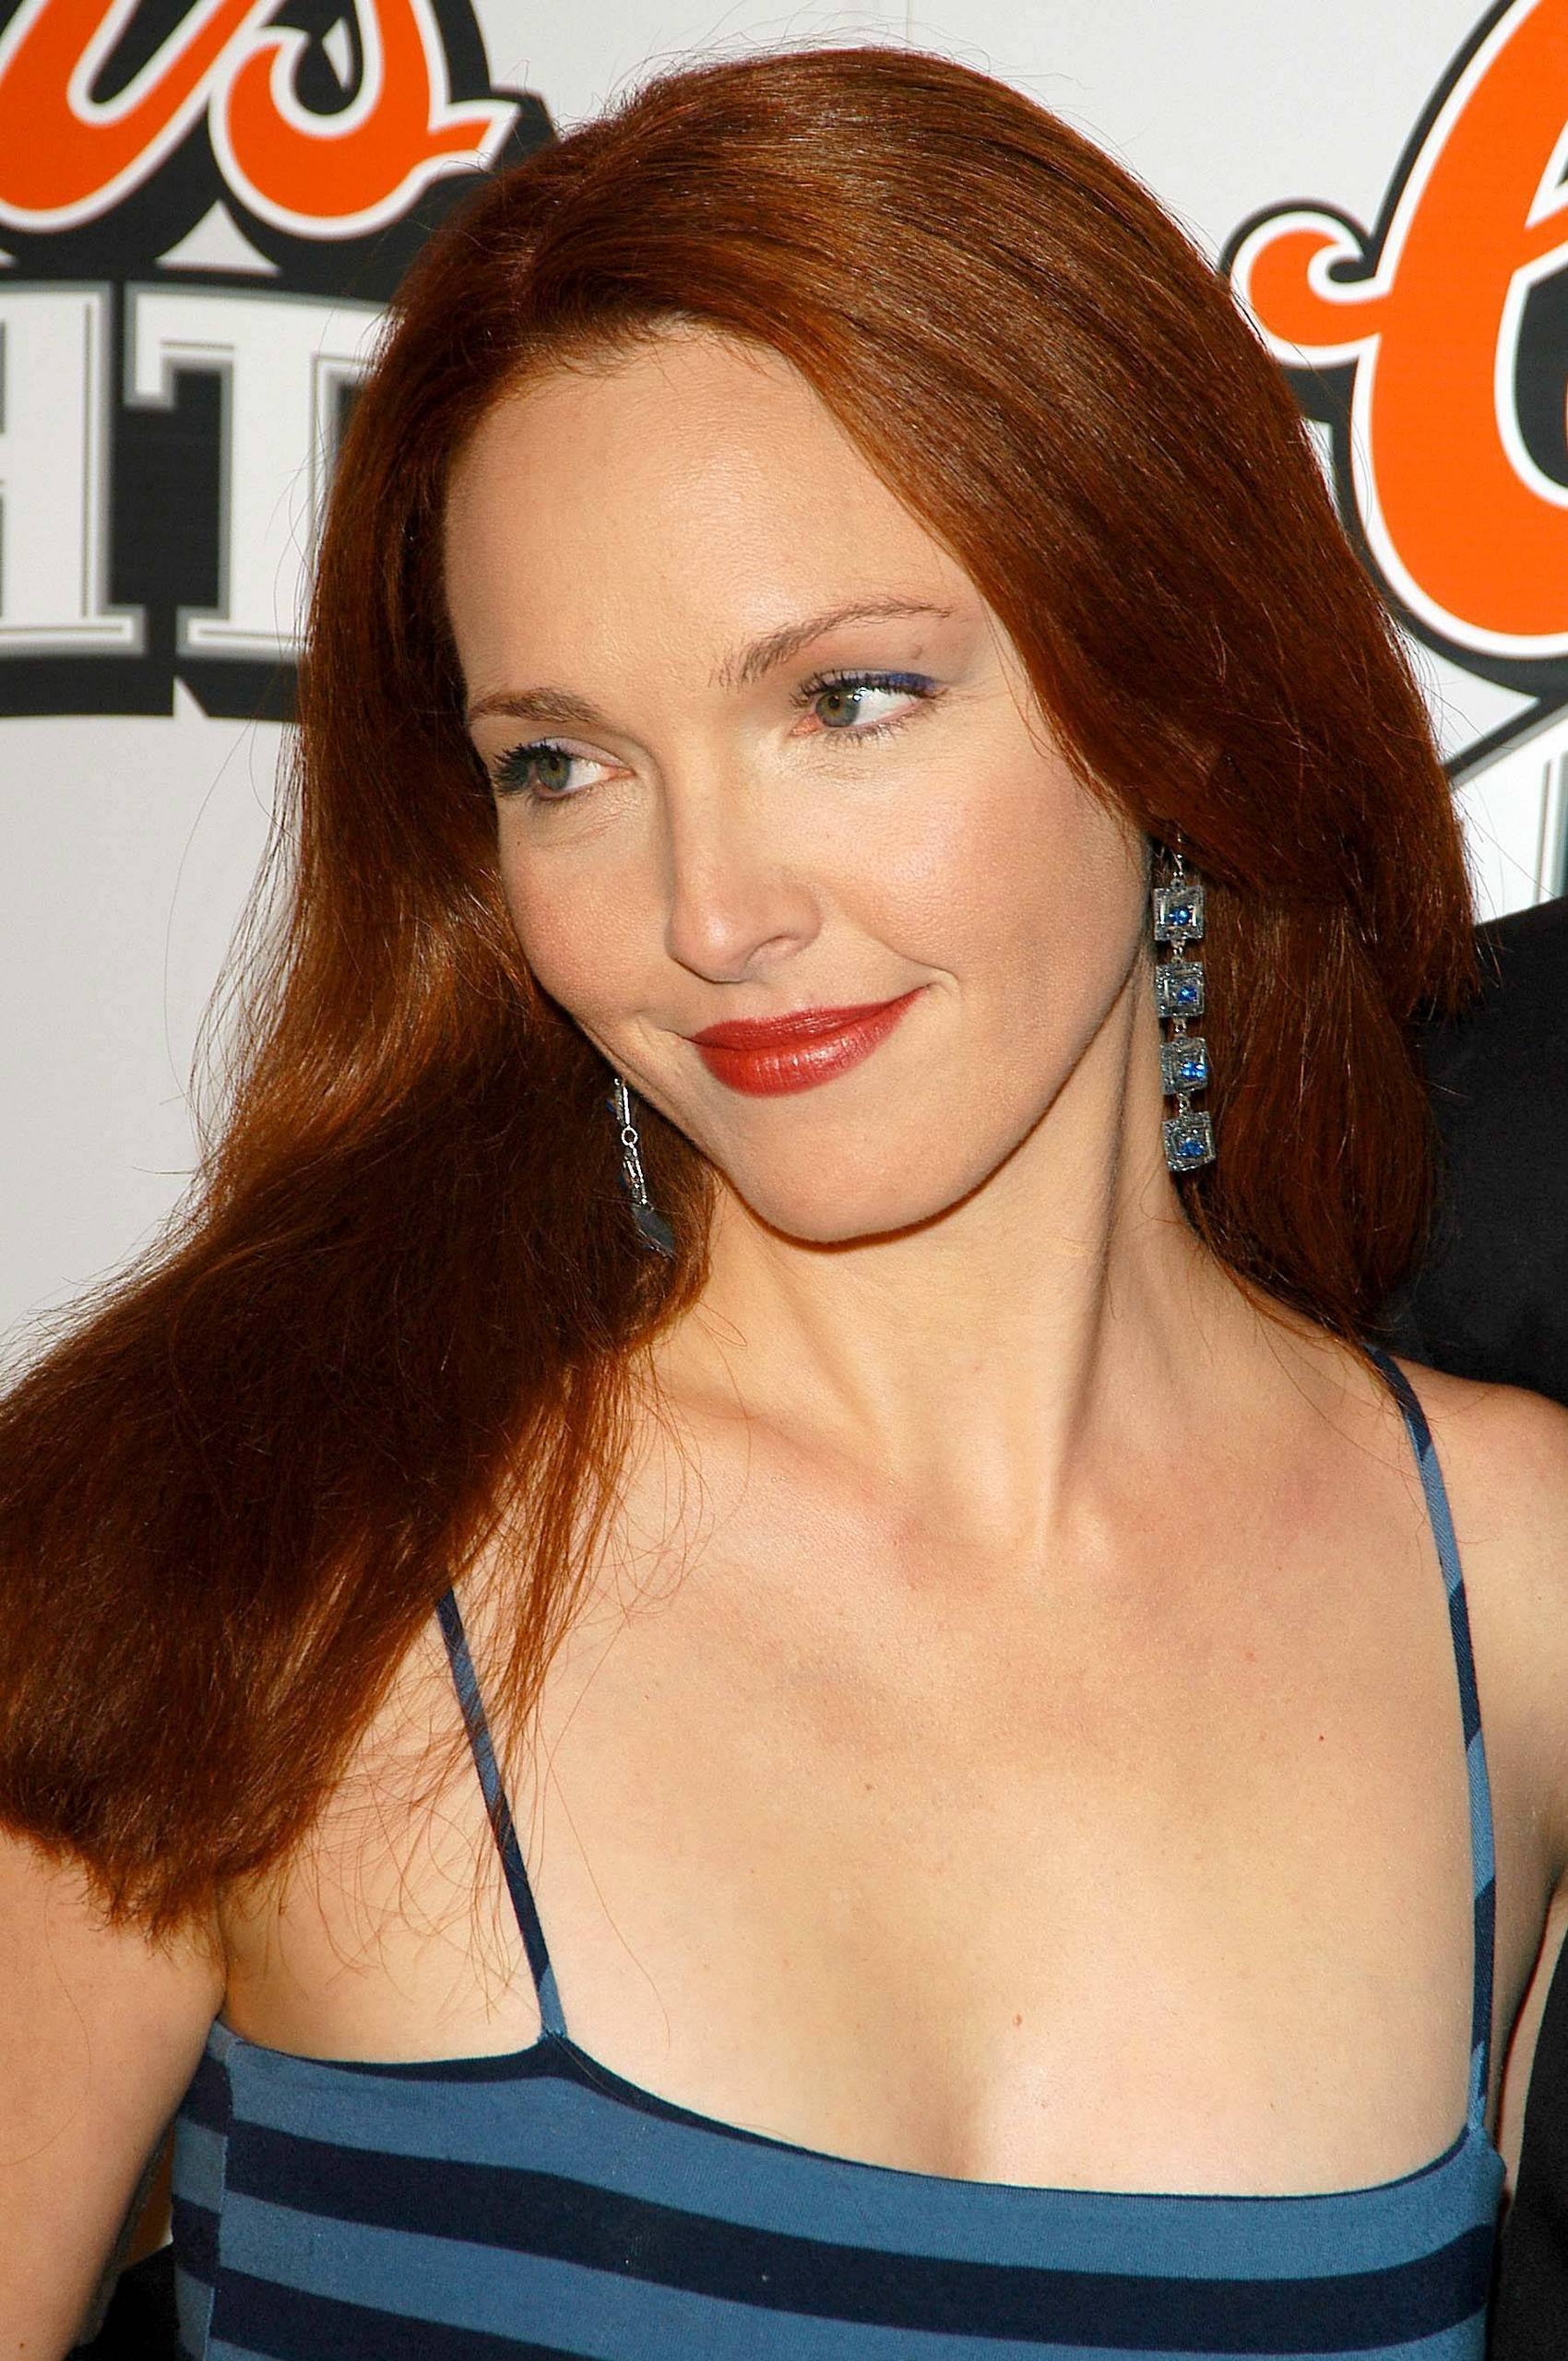 amy yasbeck, images, image, wallpaper, photos, photo, photograph, gallery, ...